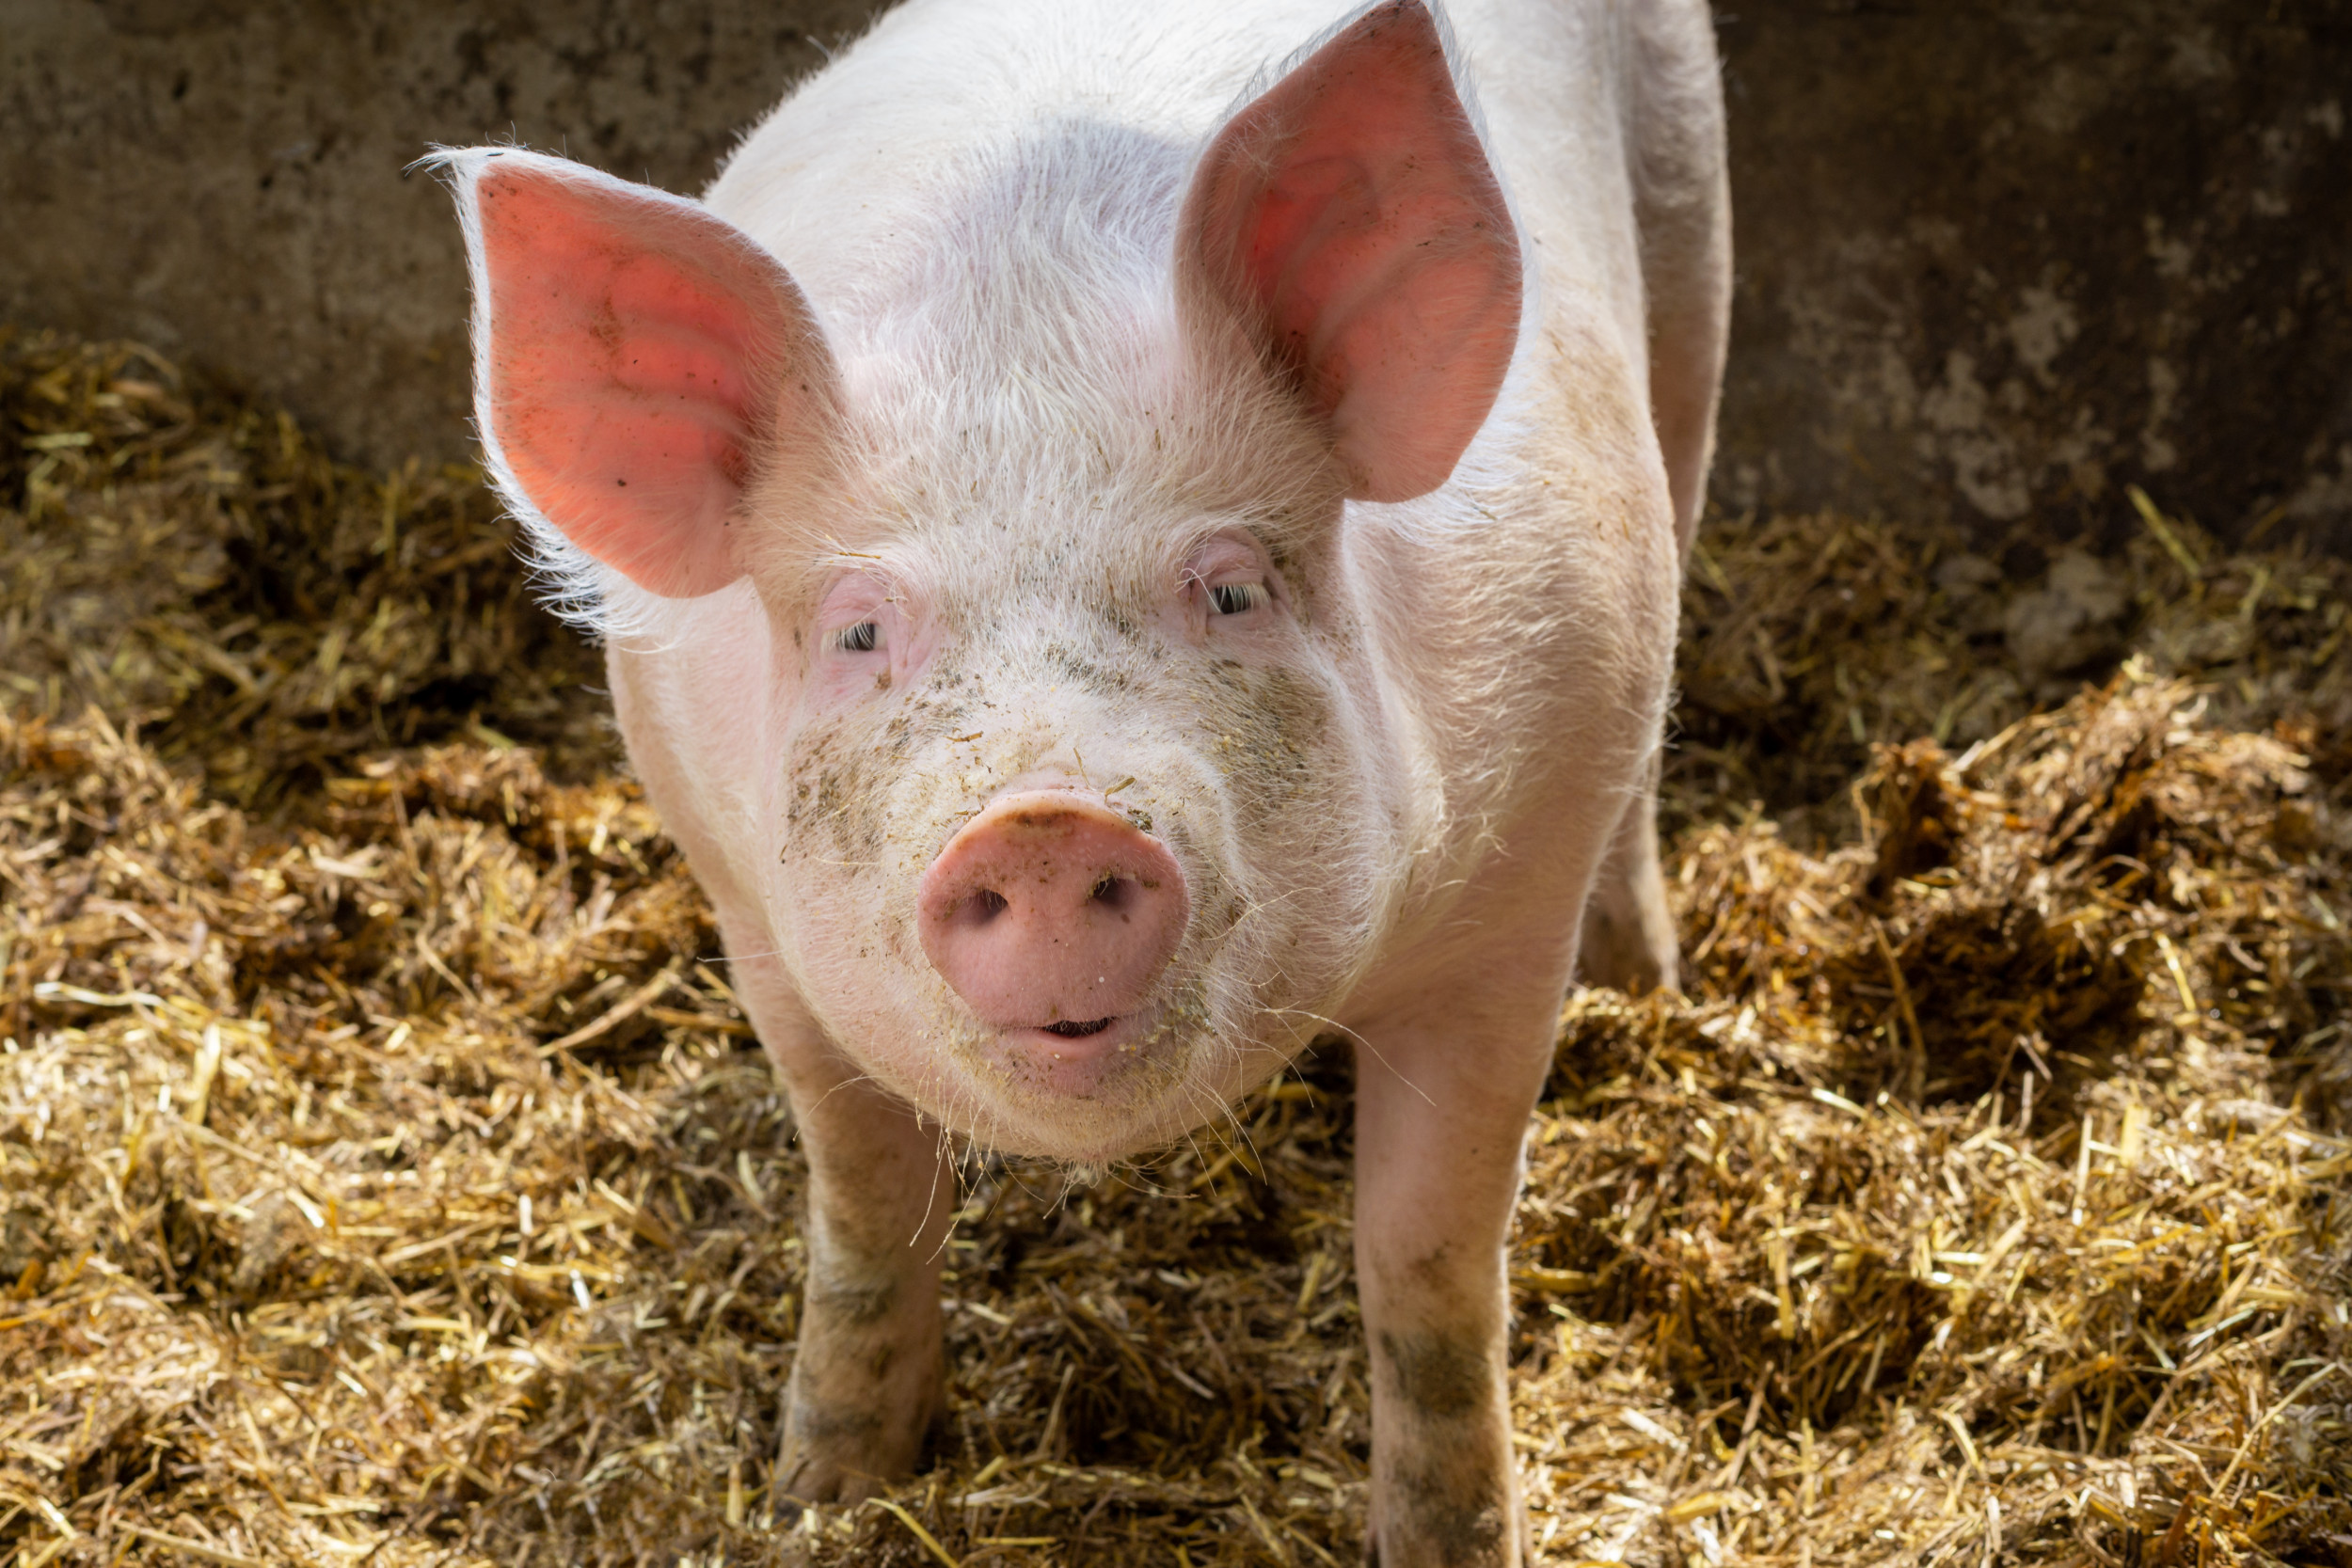 Pig Used in Human Heart Transplant Had Virus, Patient 'Looked Infected'